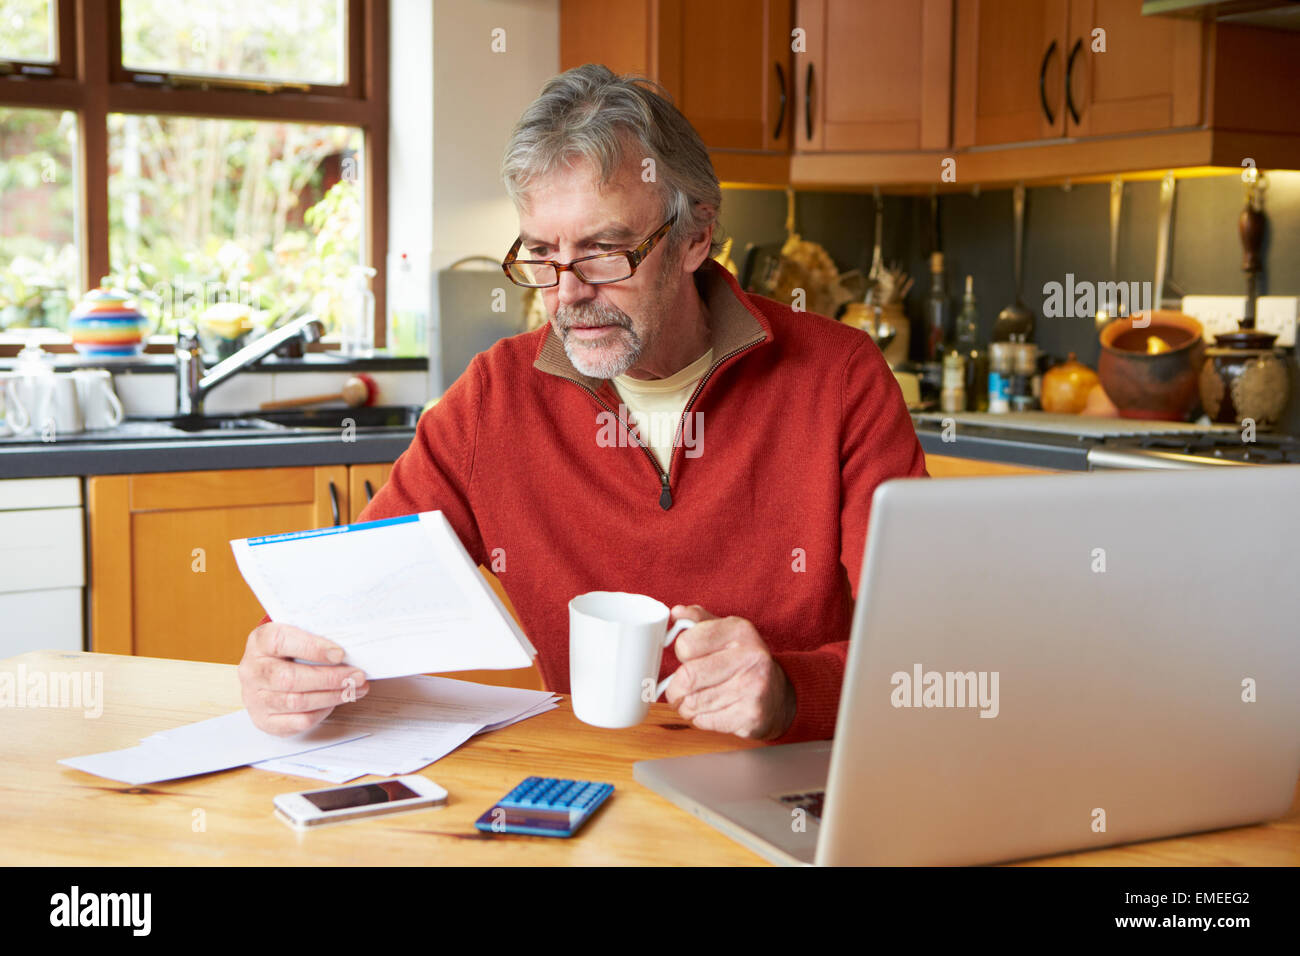 Mature Man Looking At Home Finances In Kitchen Stock Photo